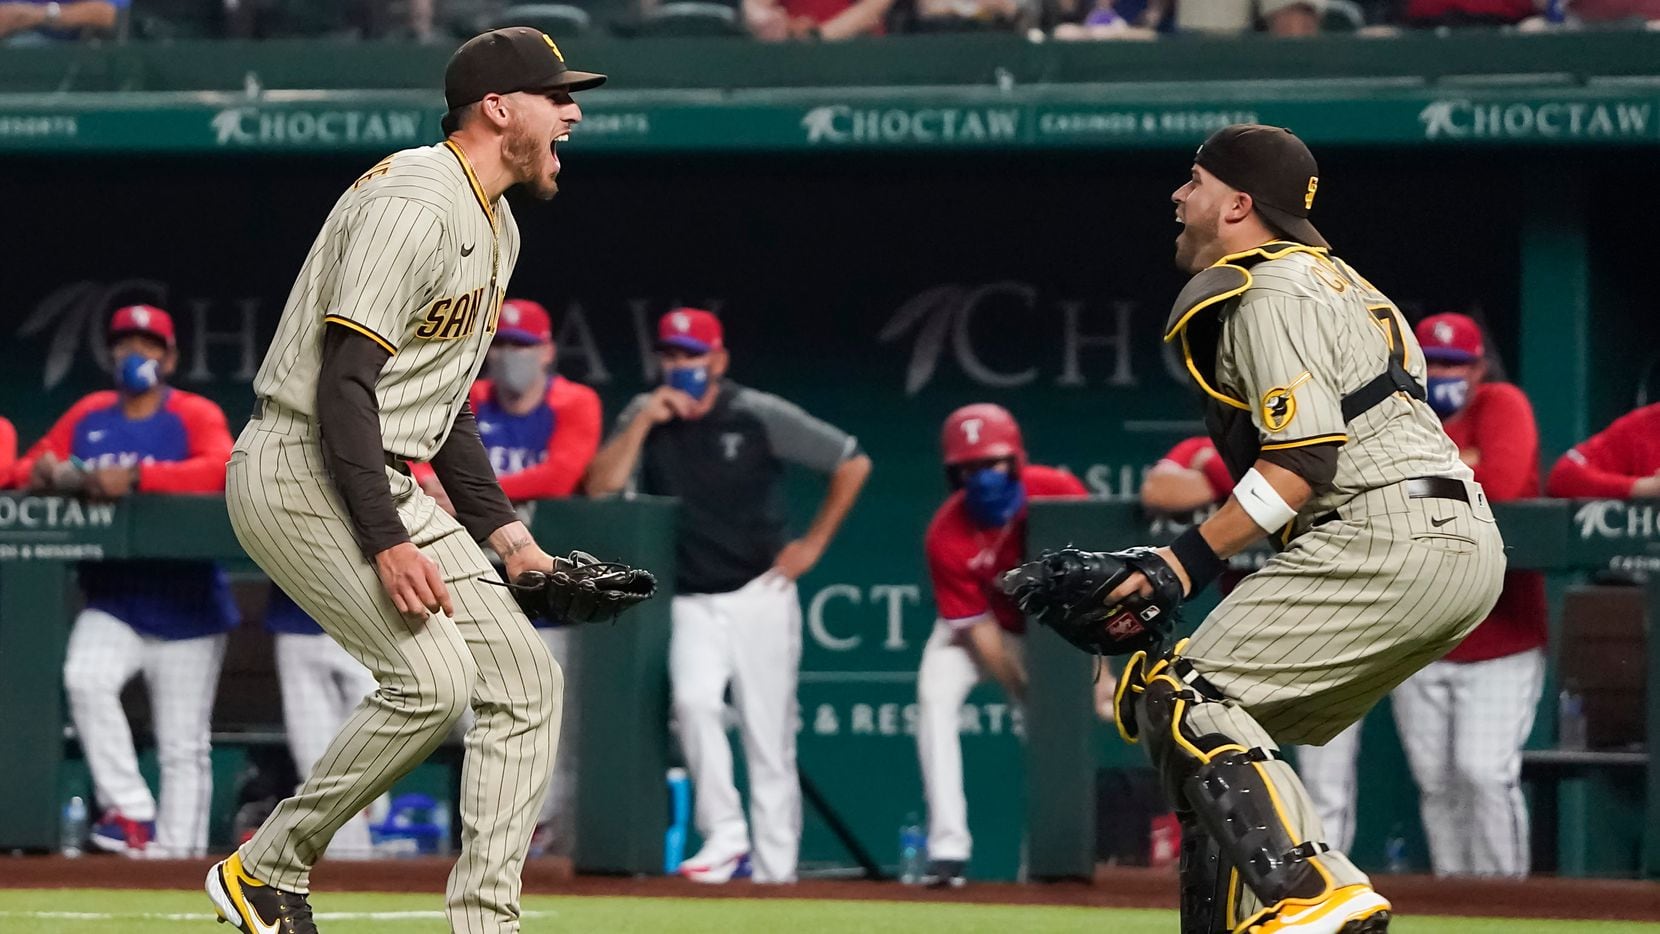 San Diego Padres starting pitcher Joe Musgrove celebrates with catcher Victor Caratini after the final out of a no-hitter over the Texas Rangers at Globe Life Field on April 9, 2021.